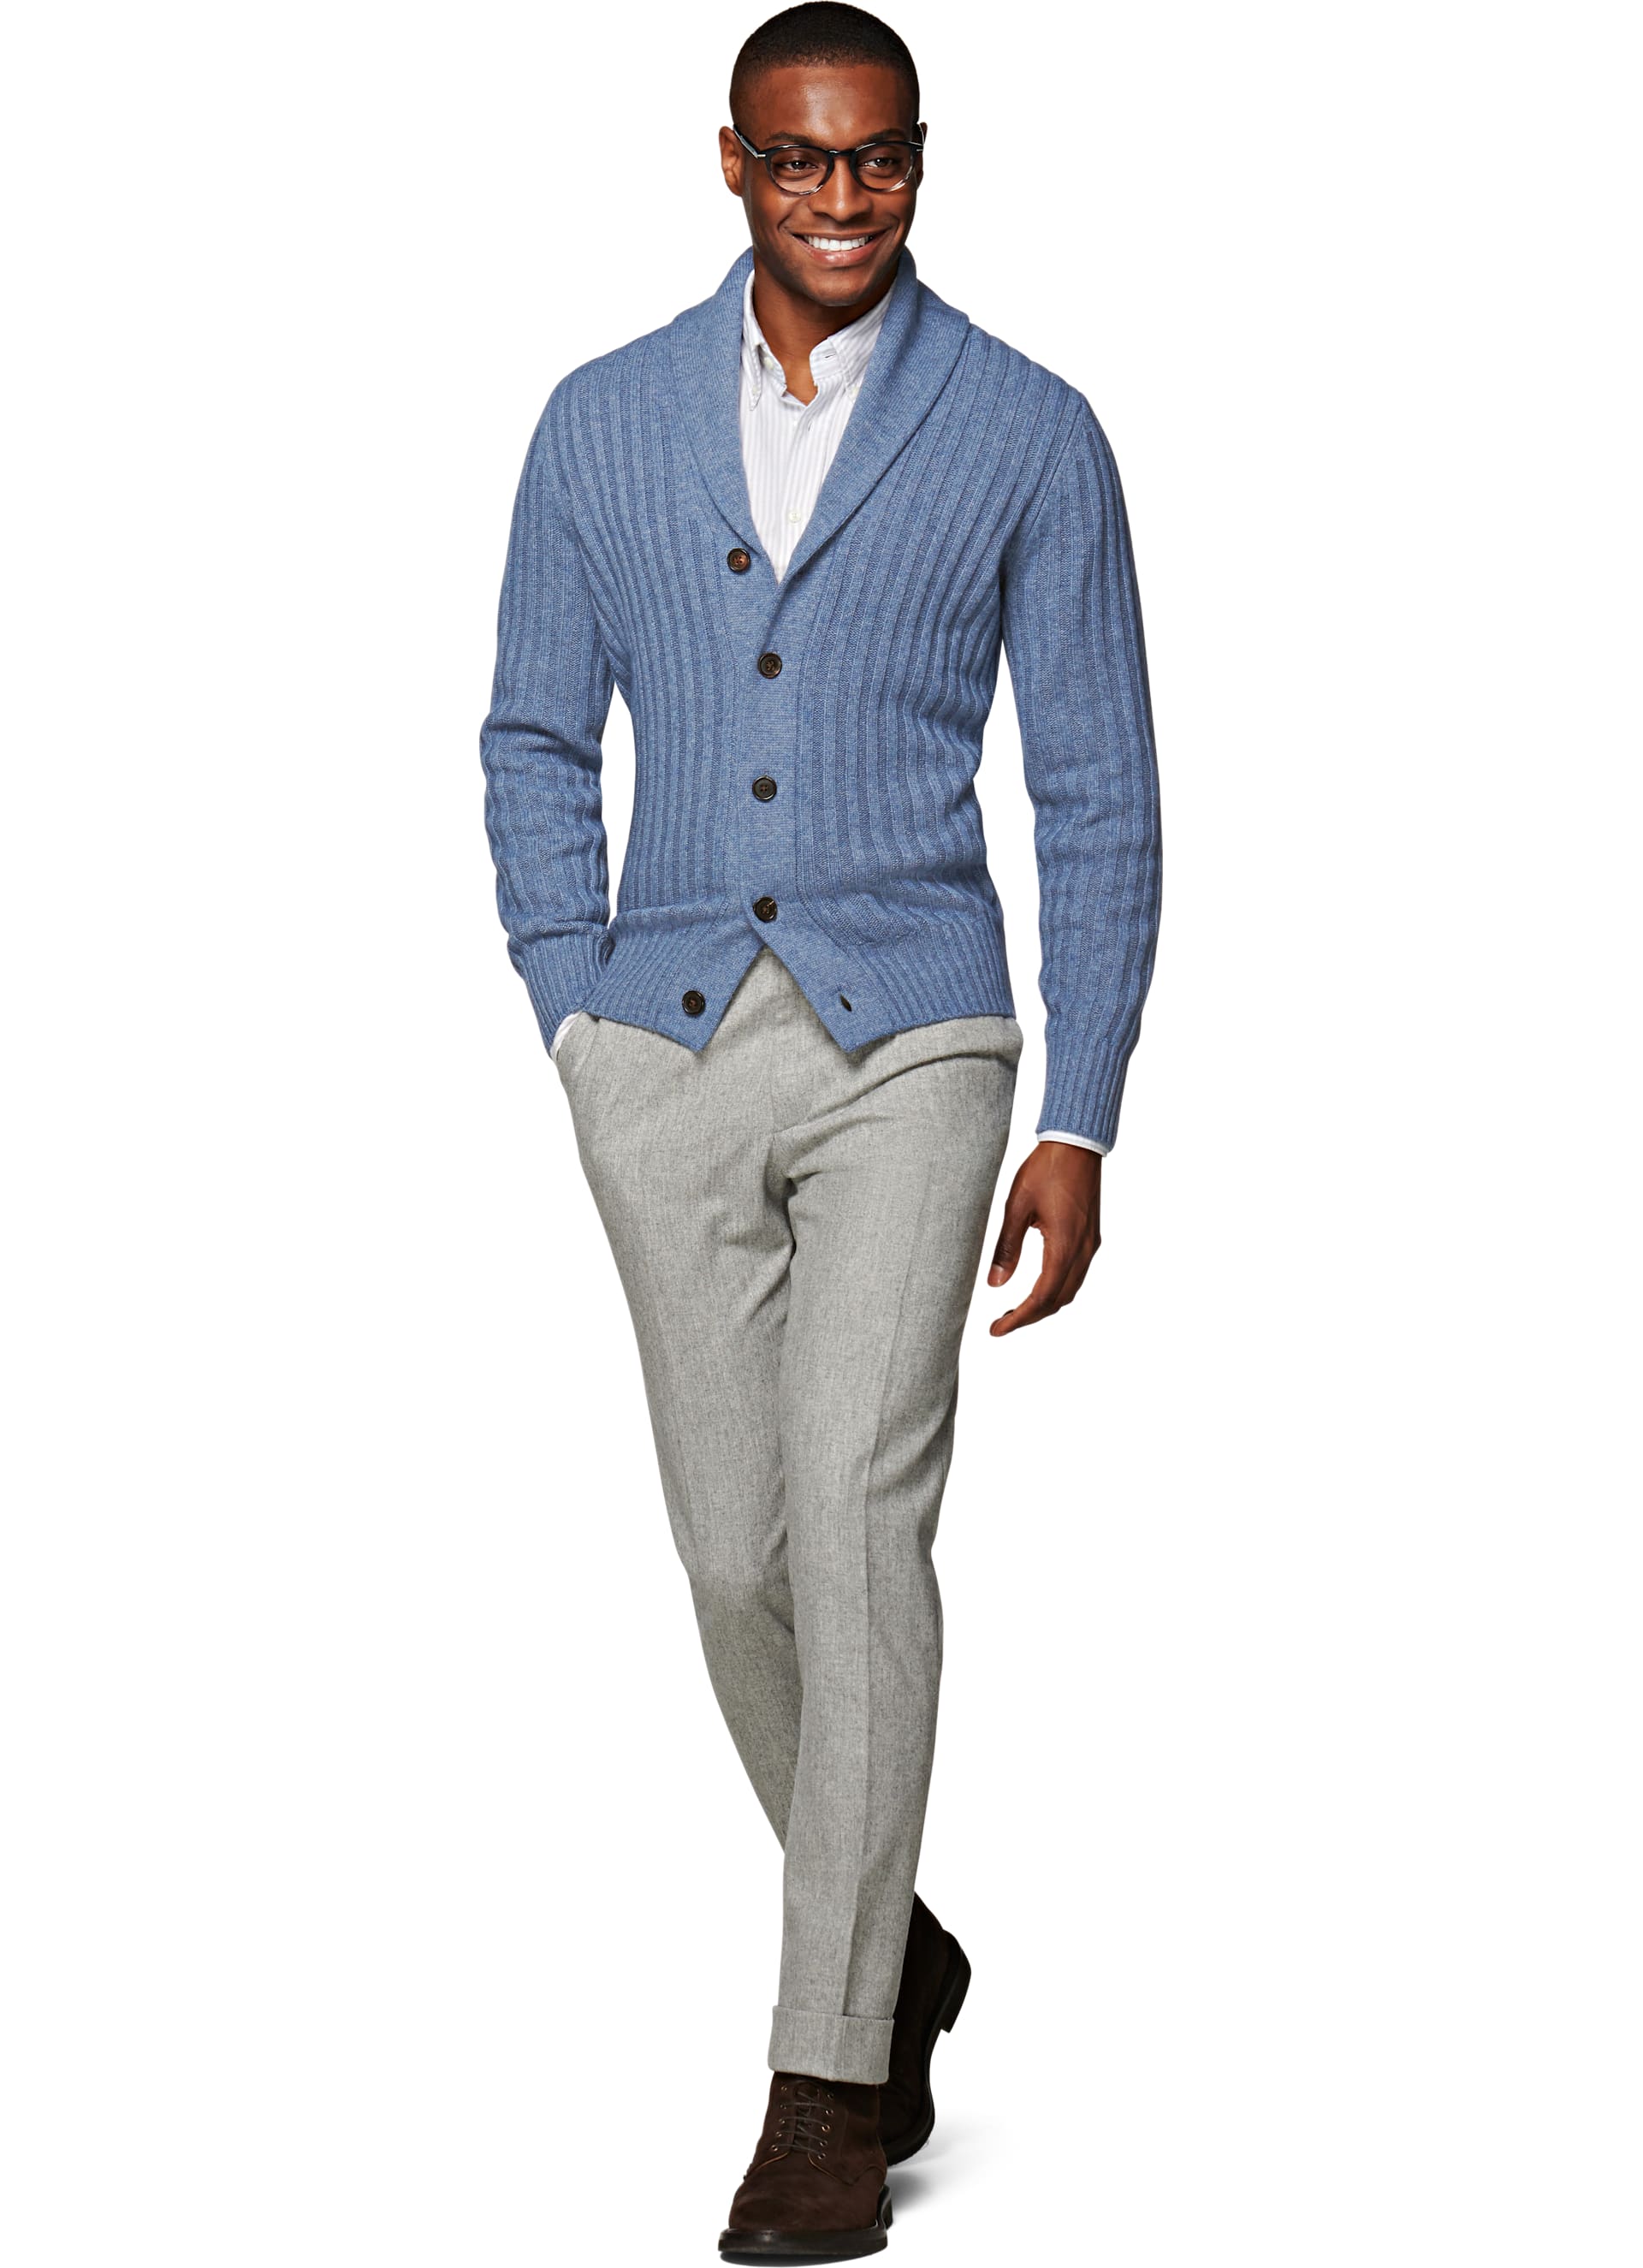 Light Blue Cardigan Sw911 | Suitsupply Online Store